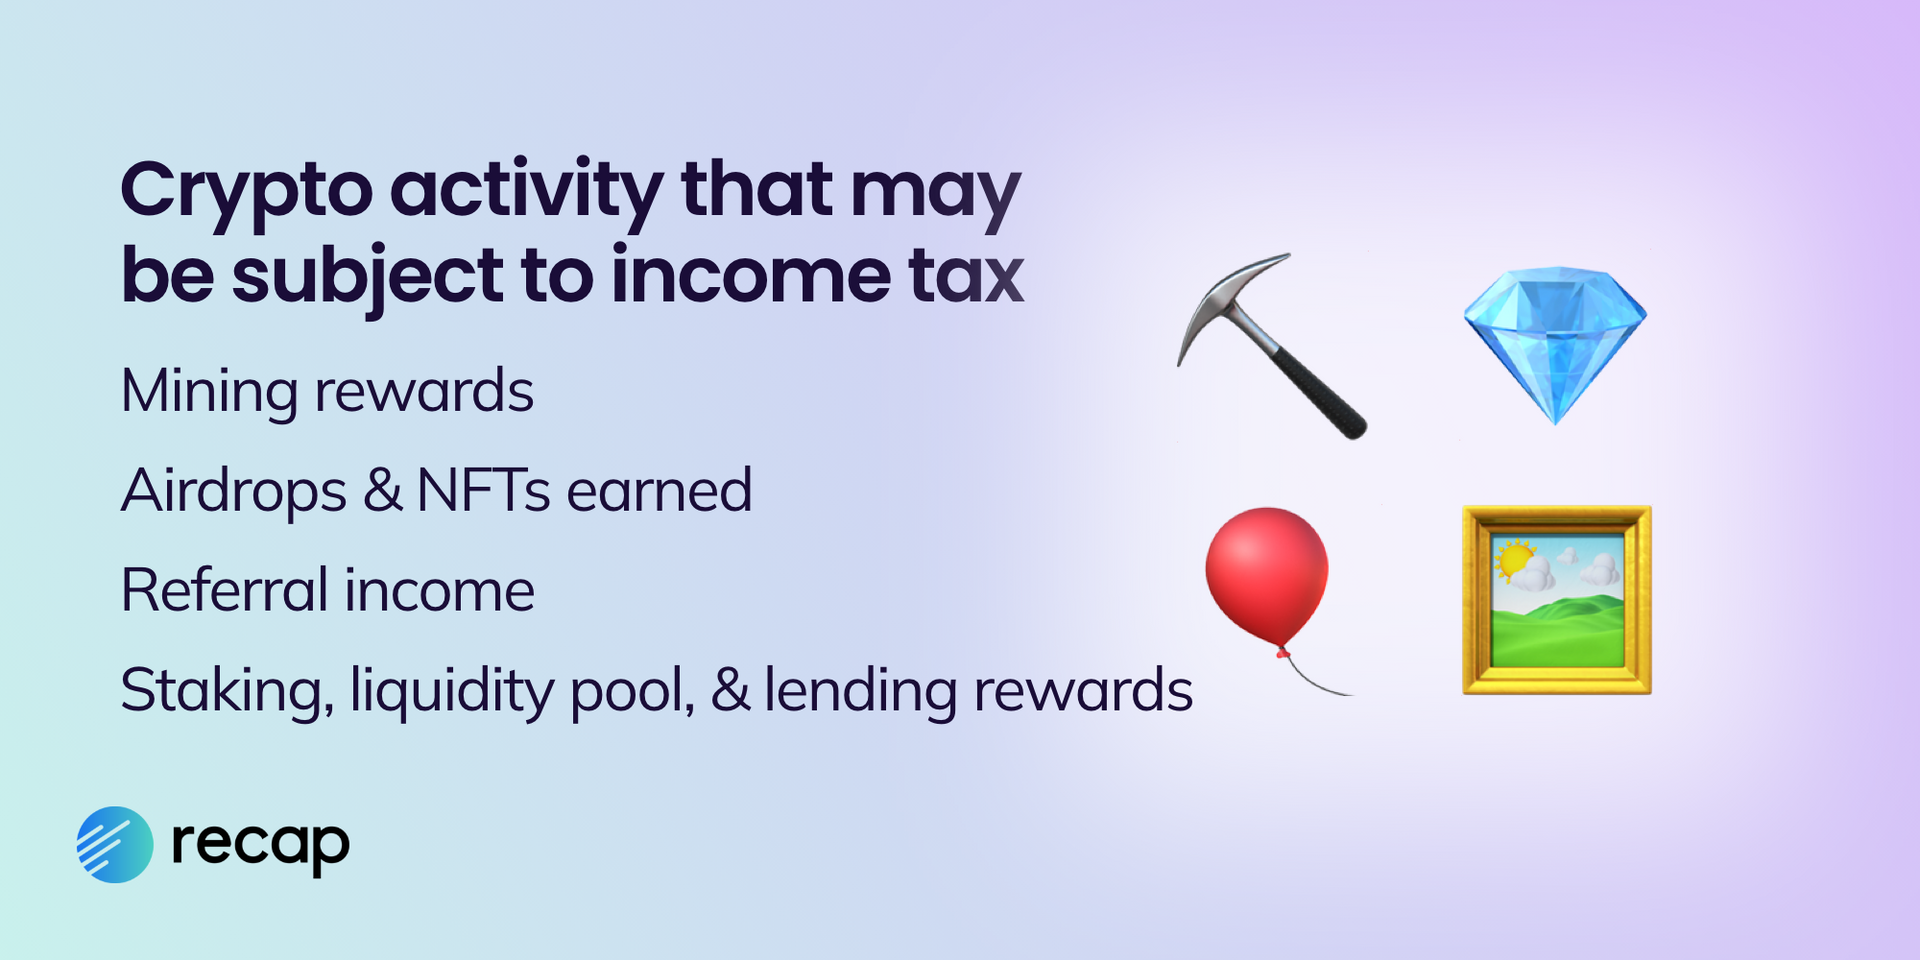 An infographic showing crypto activity that may be subject to income tax including mining rewards, airdrops, referral income, staking, lending and liquidity pool rewards and earned NFTs